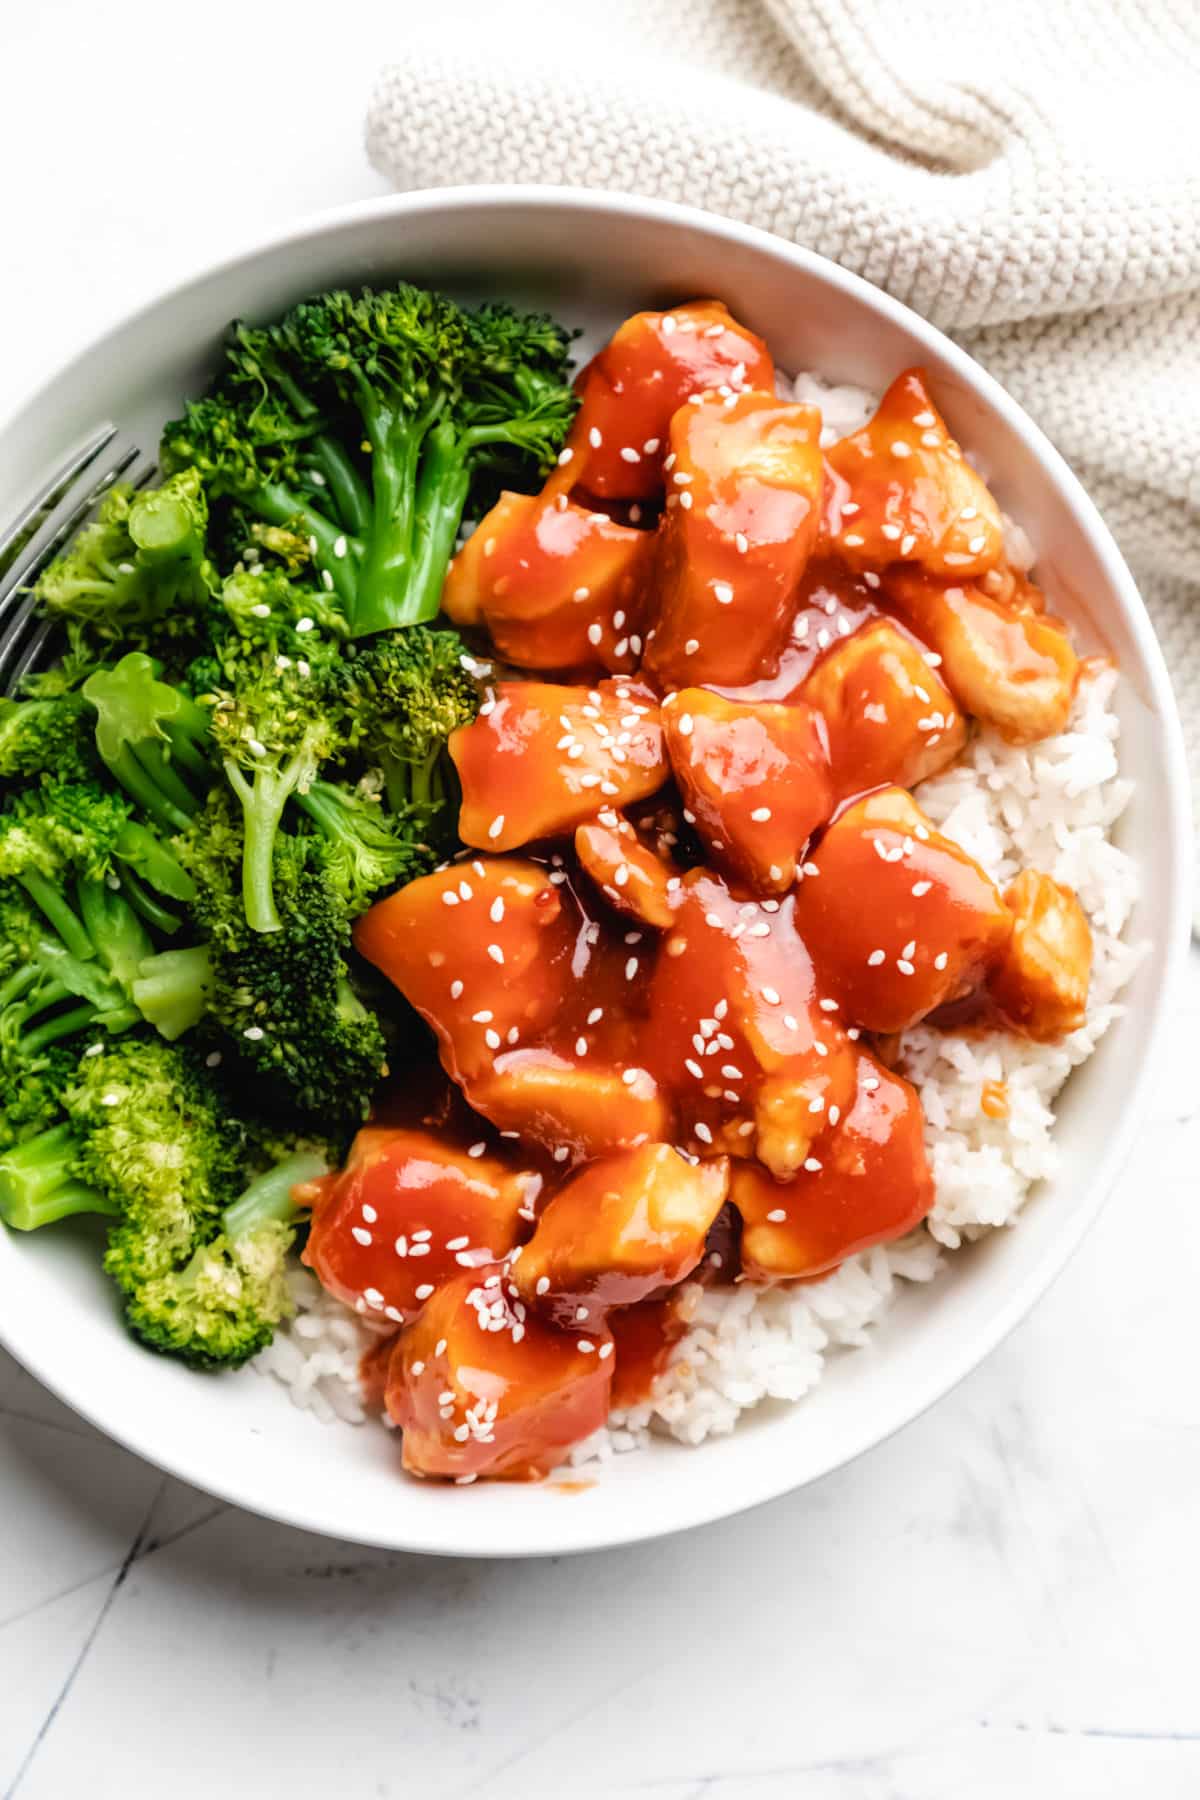 Orange chicken topped with sesame seeds in white dish next to steamed broccoli.